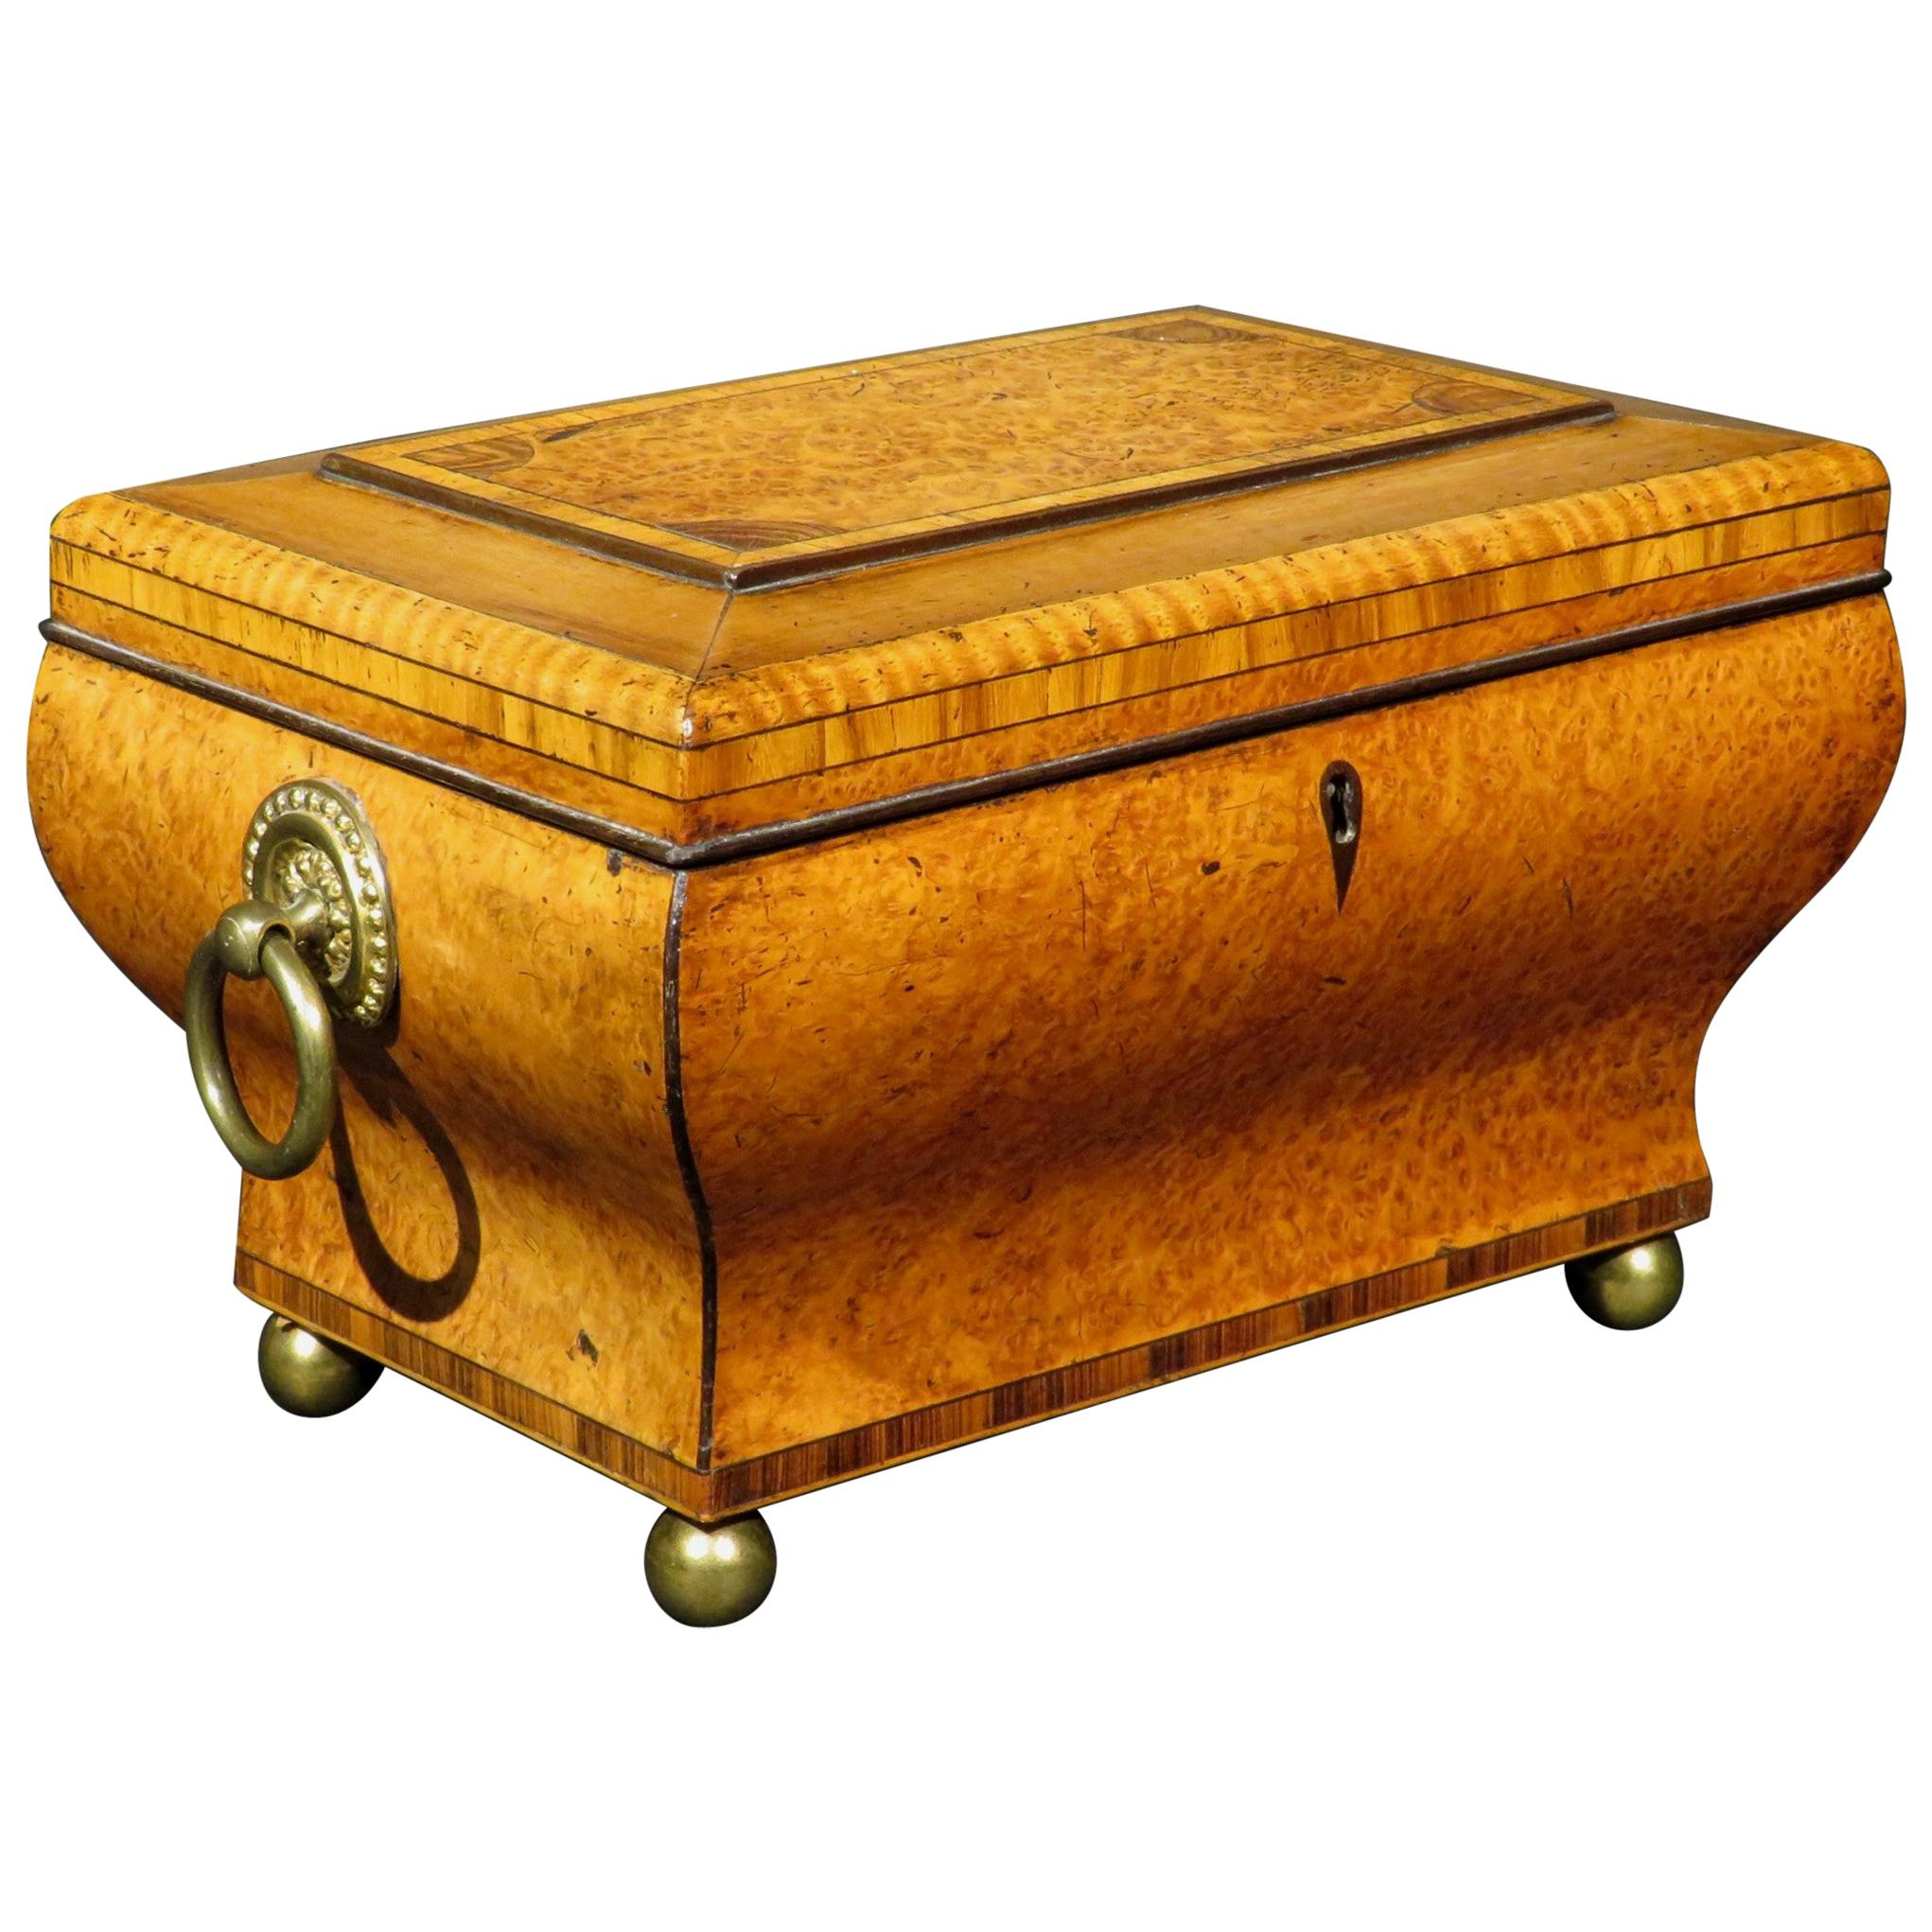 Very Fine Biedermeier Period Tea Caddy of Bombe Form in Exotic Woods, circa 1830 For Sale